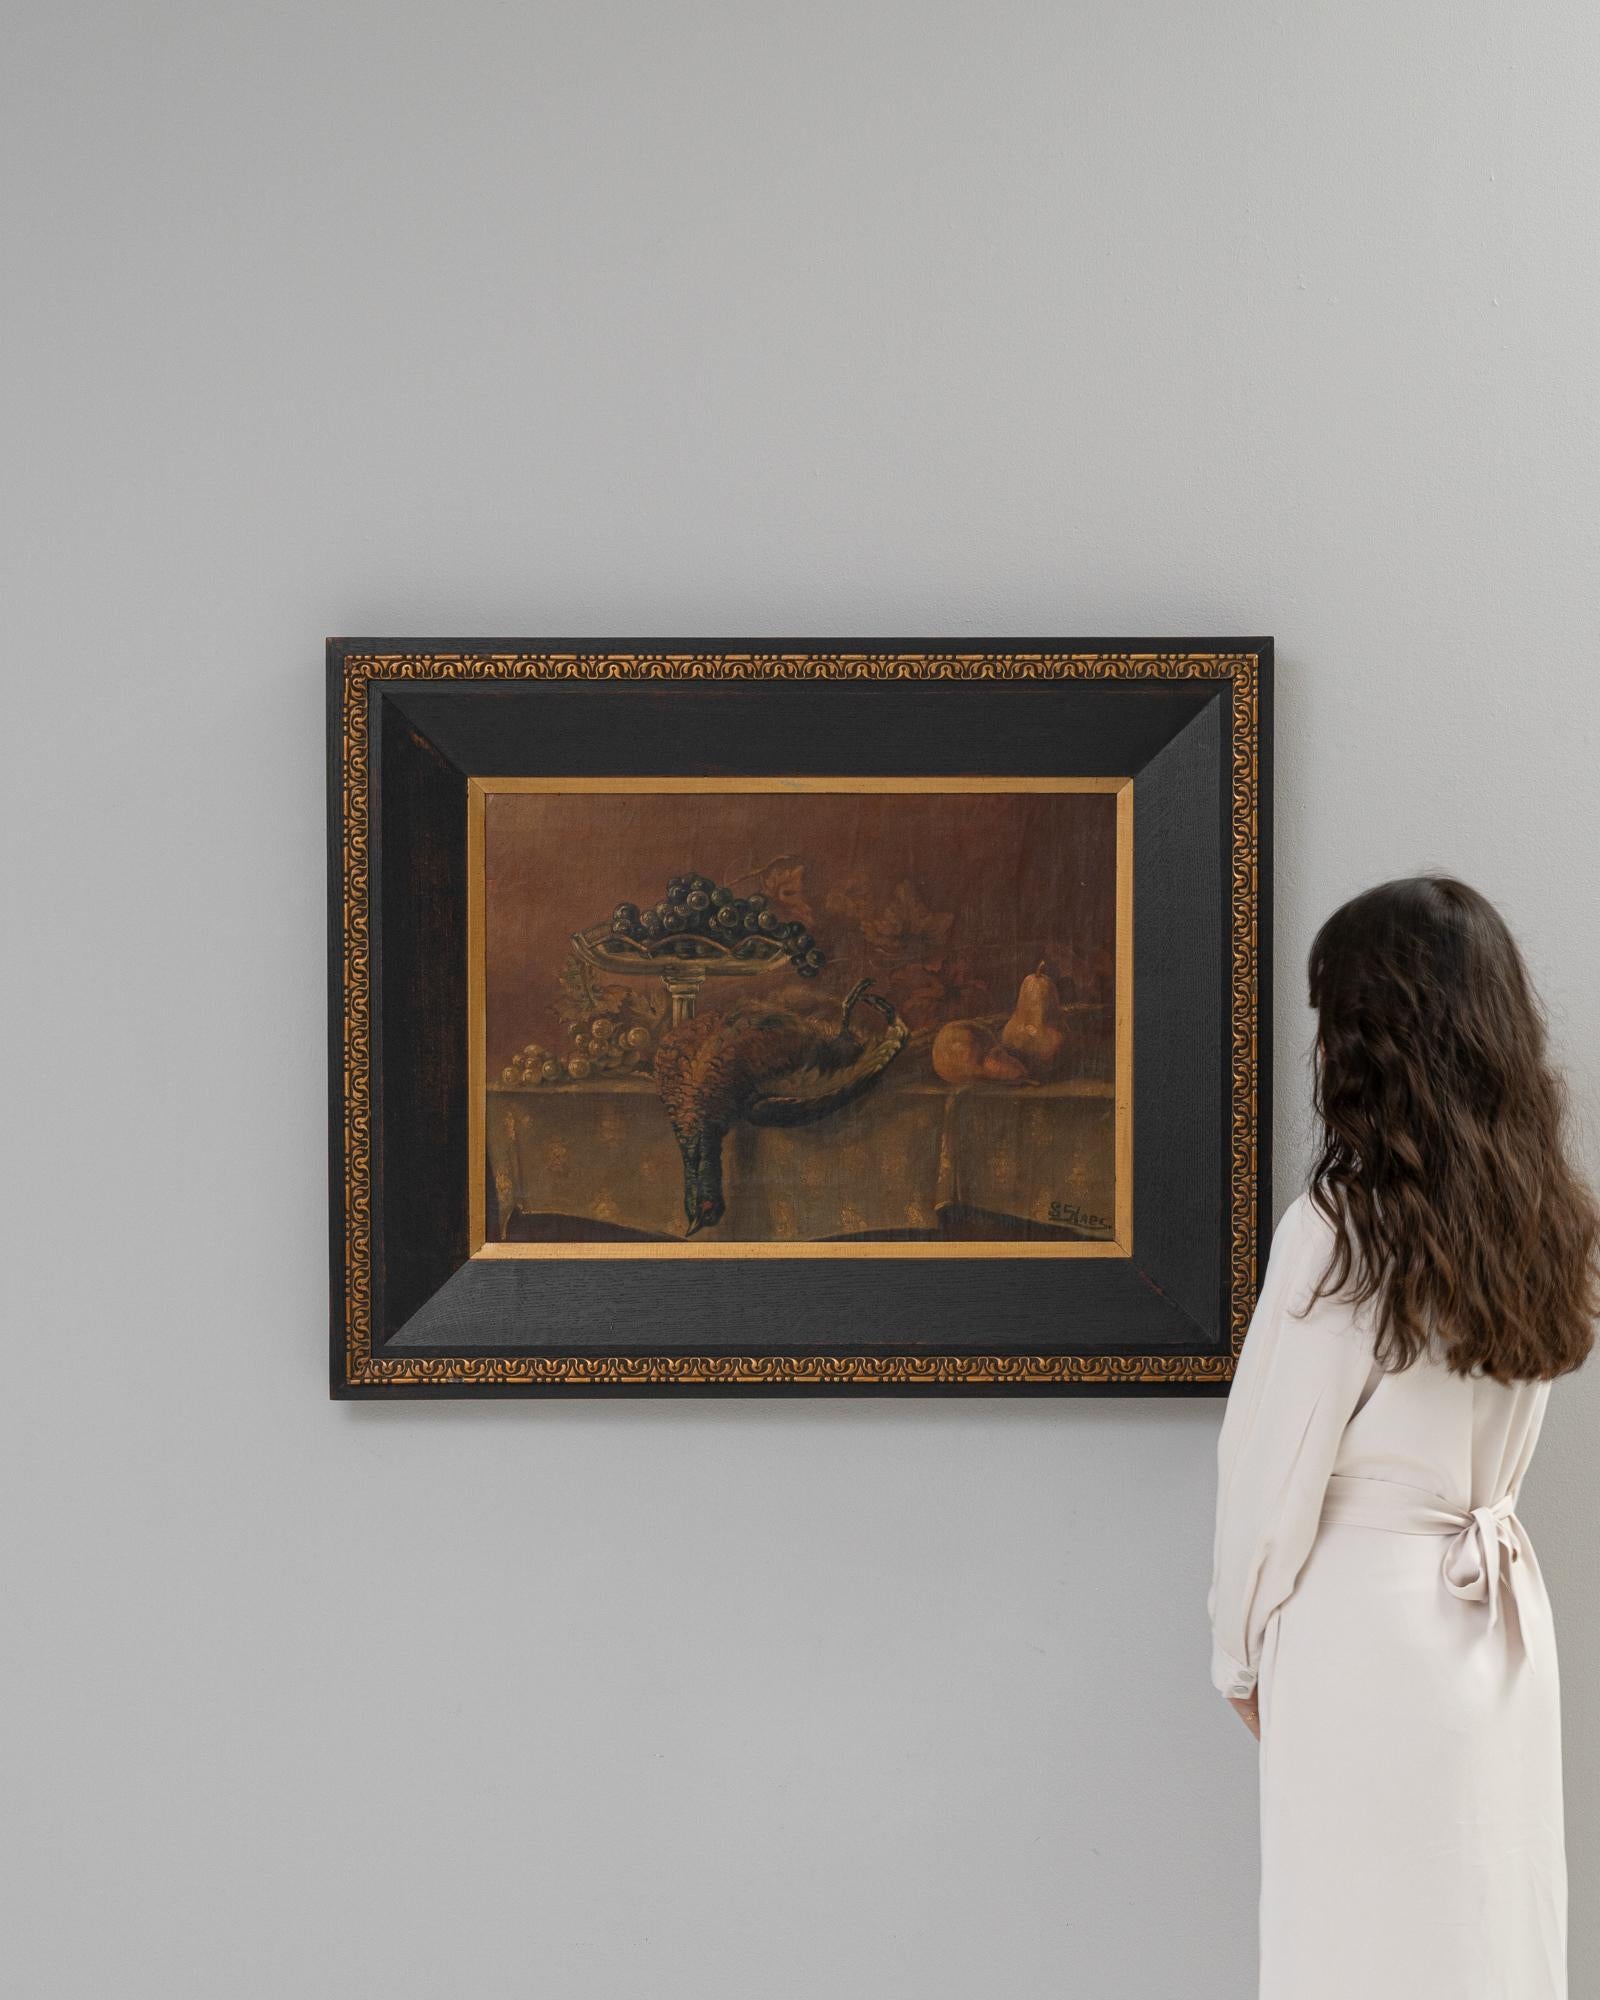 This evocative 20th Century French painting captures the rich, textured essence of a still life. Nestled in an ornate gilt frame that complements its era, the artwork showcases a tableau of opulence and abundance with a bountiful bowl of fruit and a